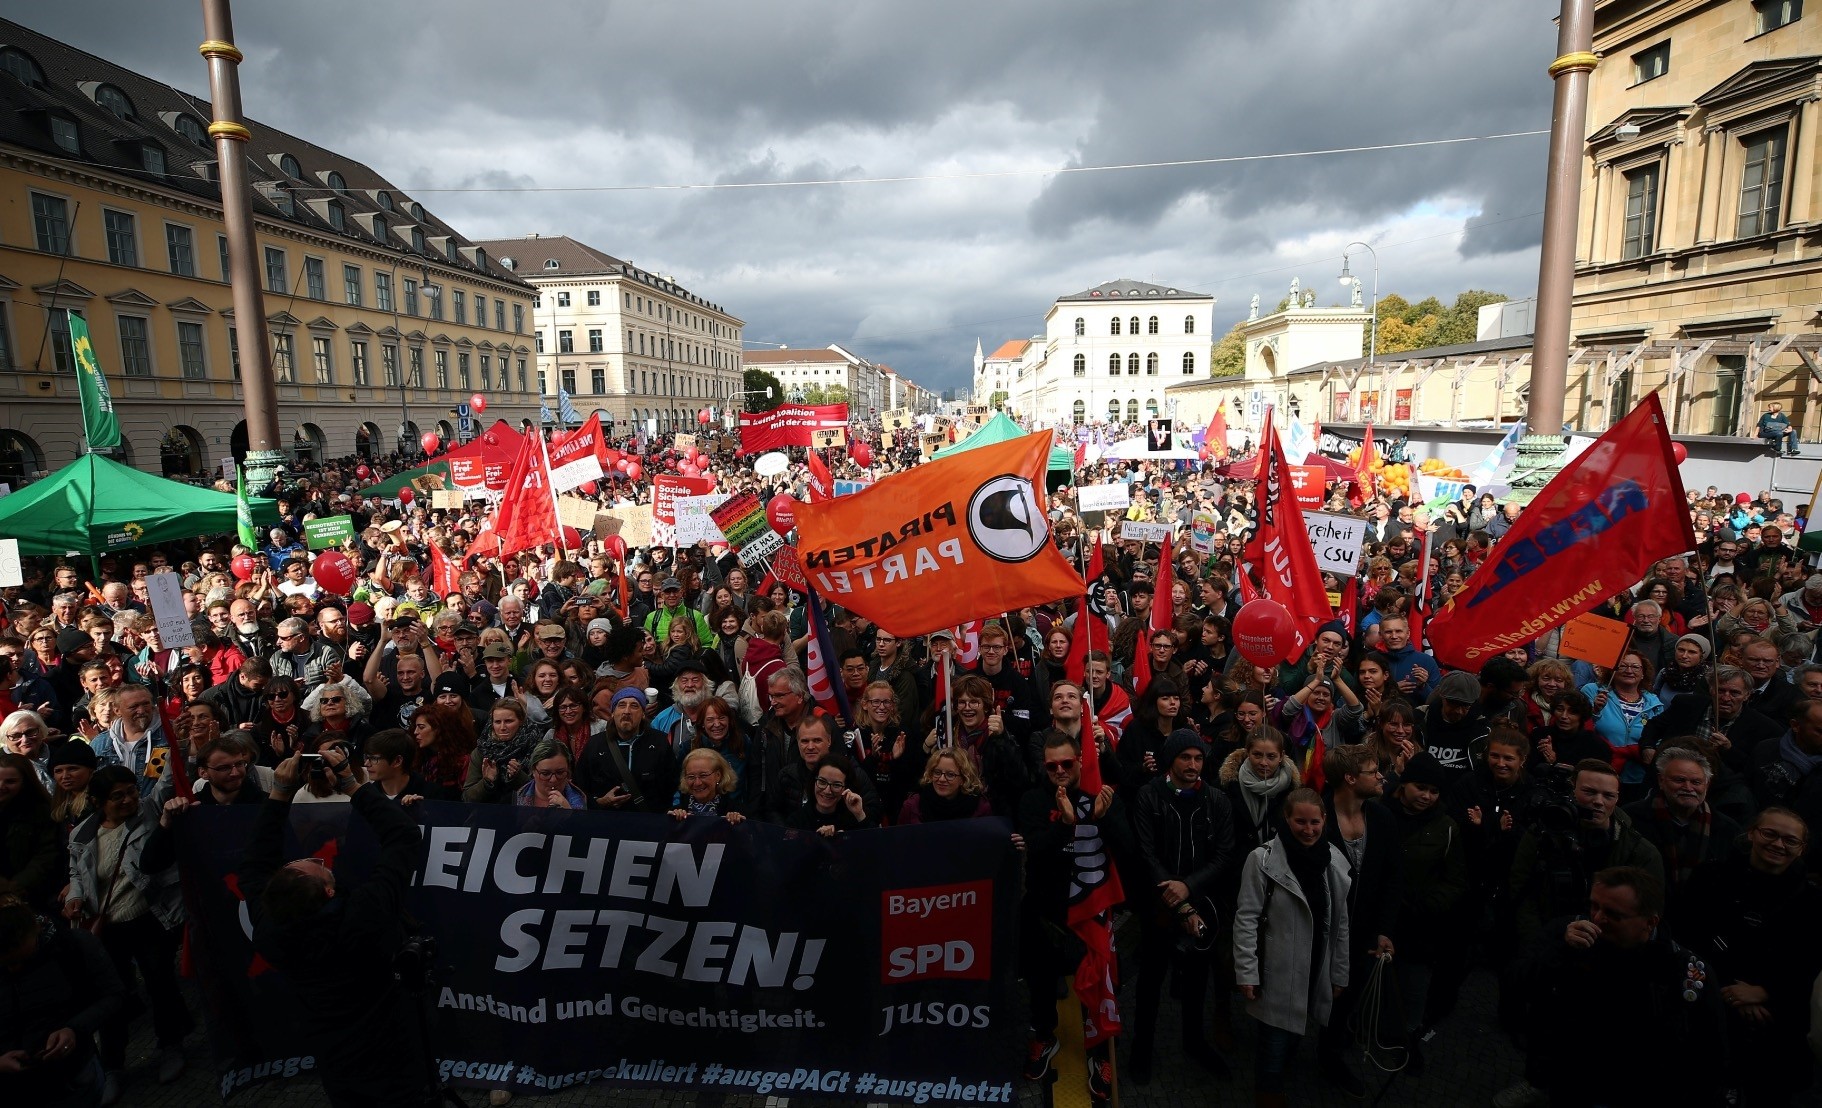 People gather to protest against populism, the trend increasingly associated with the political right and the use of hate speech, during a demonstration in Munich, Germany, Oct. 3.